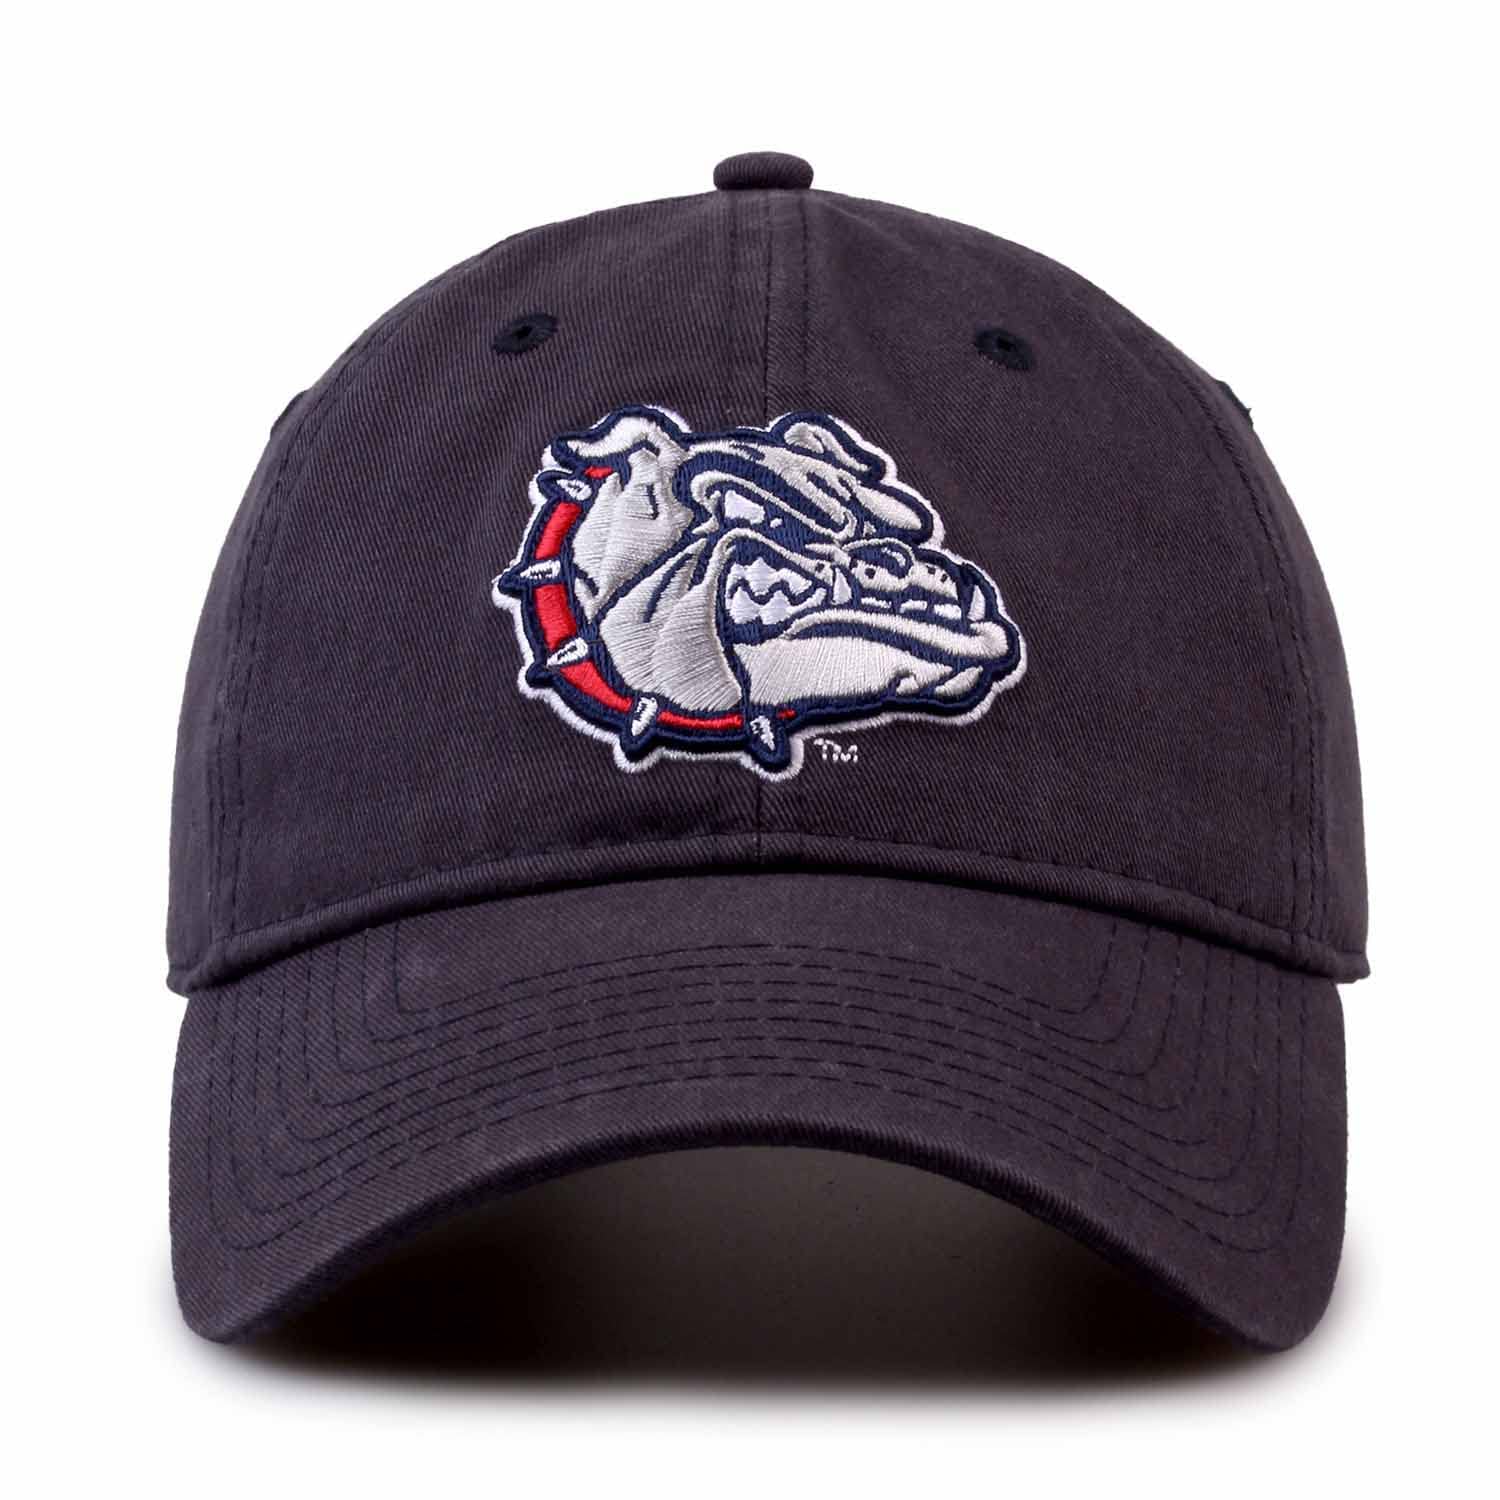 The Game Gonzaga Bulldogs Hat For Men And Women - Adjustable Relaxed Fit With Embroidered Logo (Gonzaga Bulldogs - Blue, Adult A